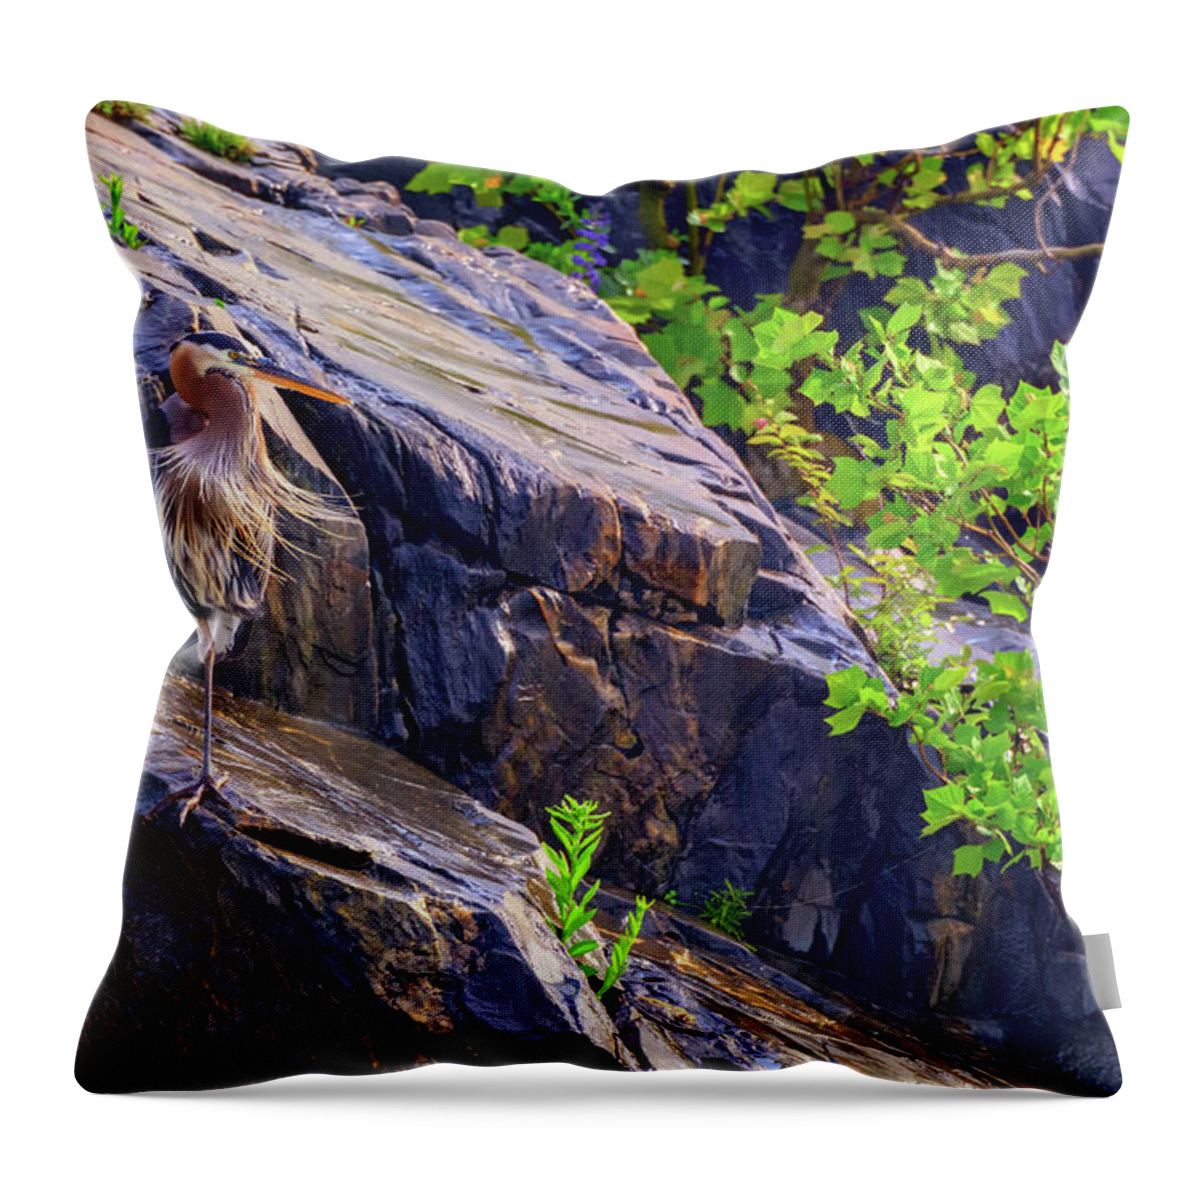 Great Blue Heron Throw Pillow featuring the photograph Great Blue Heron by Rick Berk